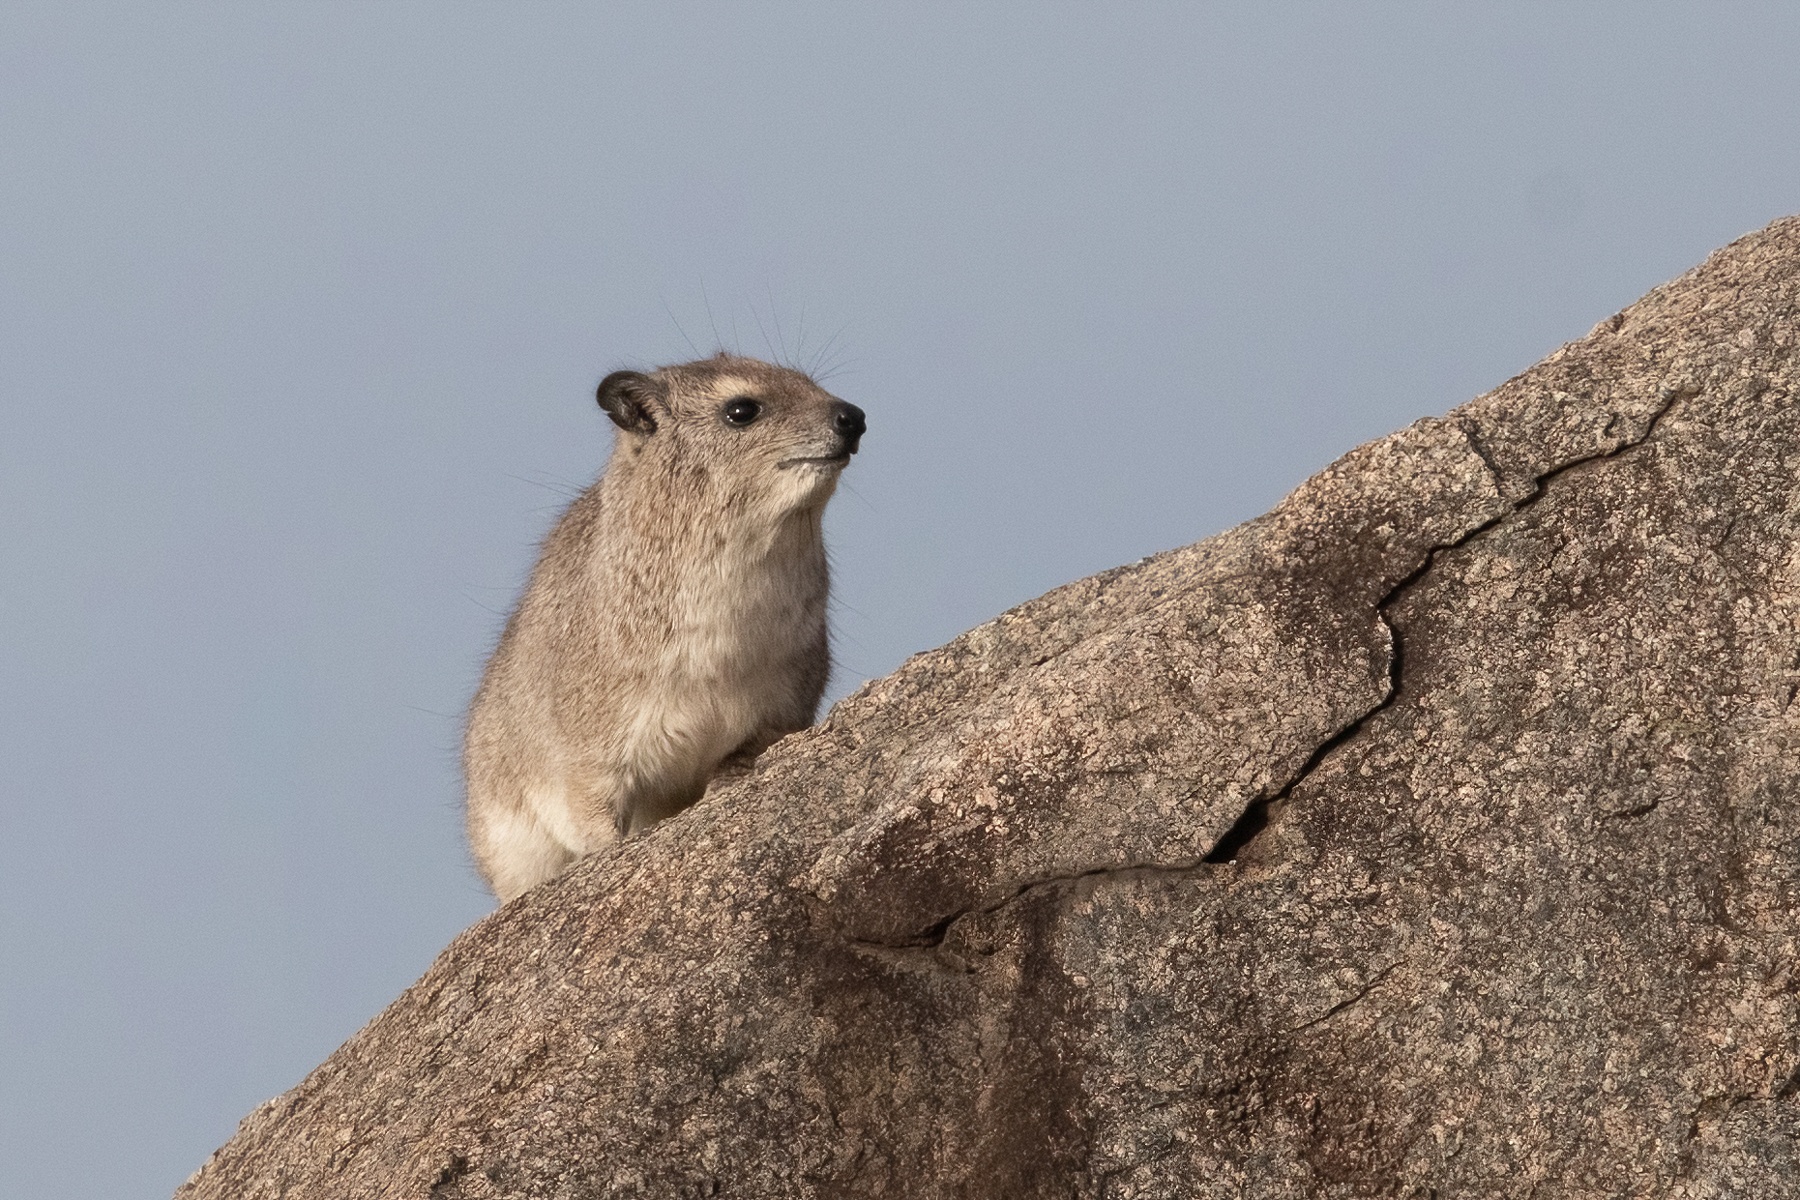 Cute Rock Hyraxes are always wonderful to see on the kopjes of the Serengeti